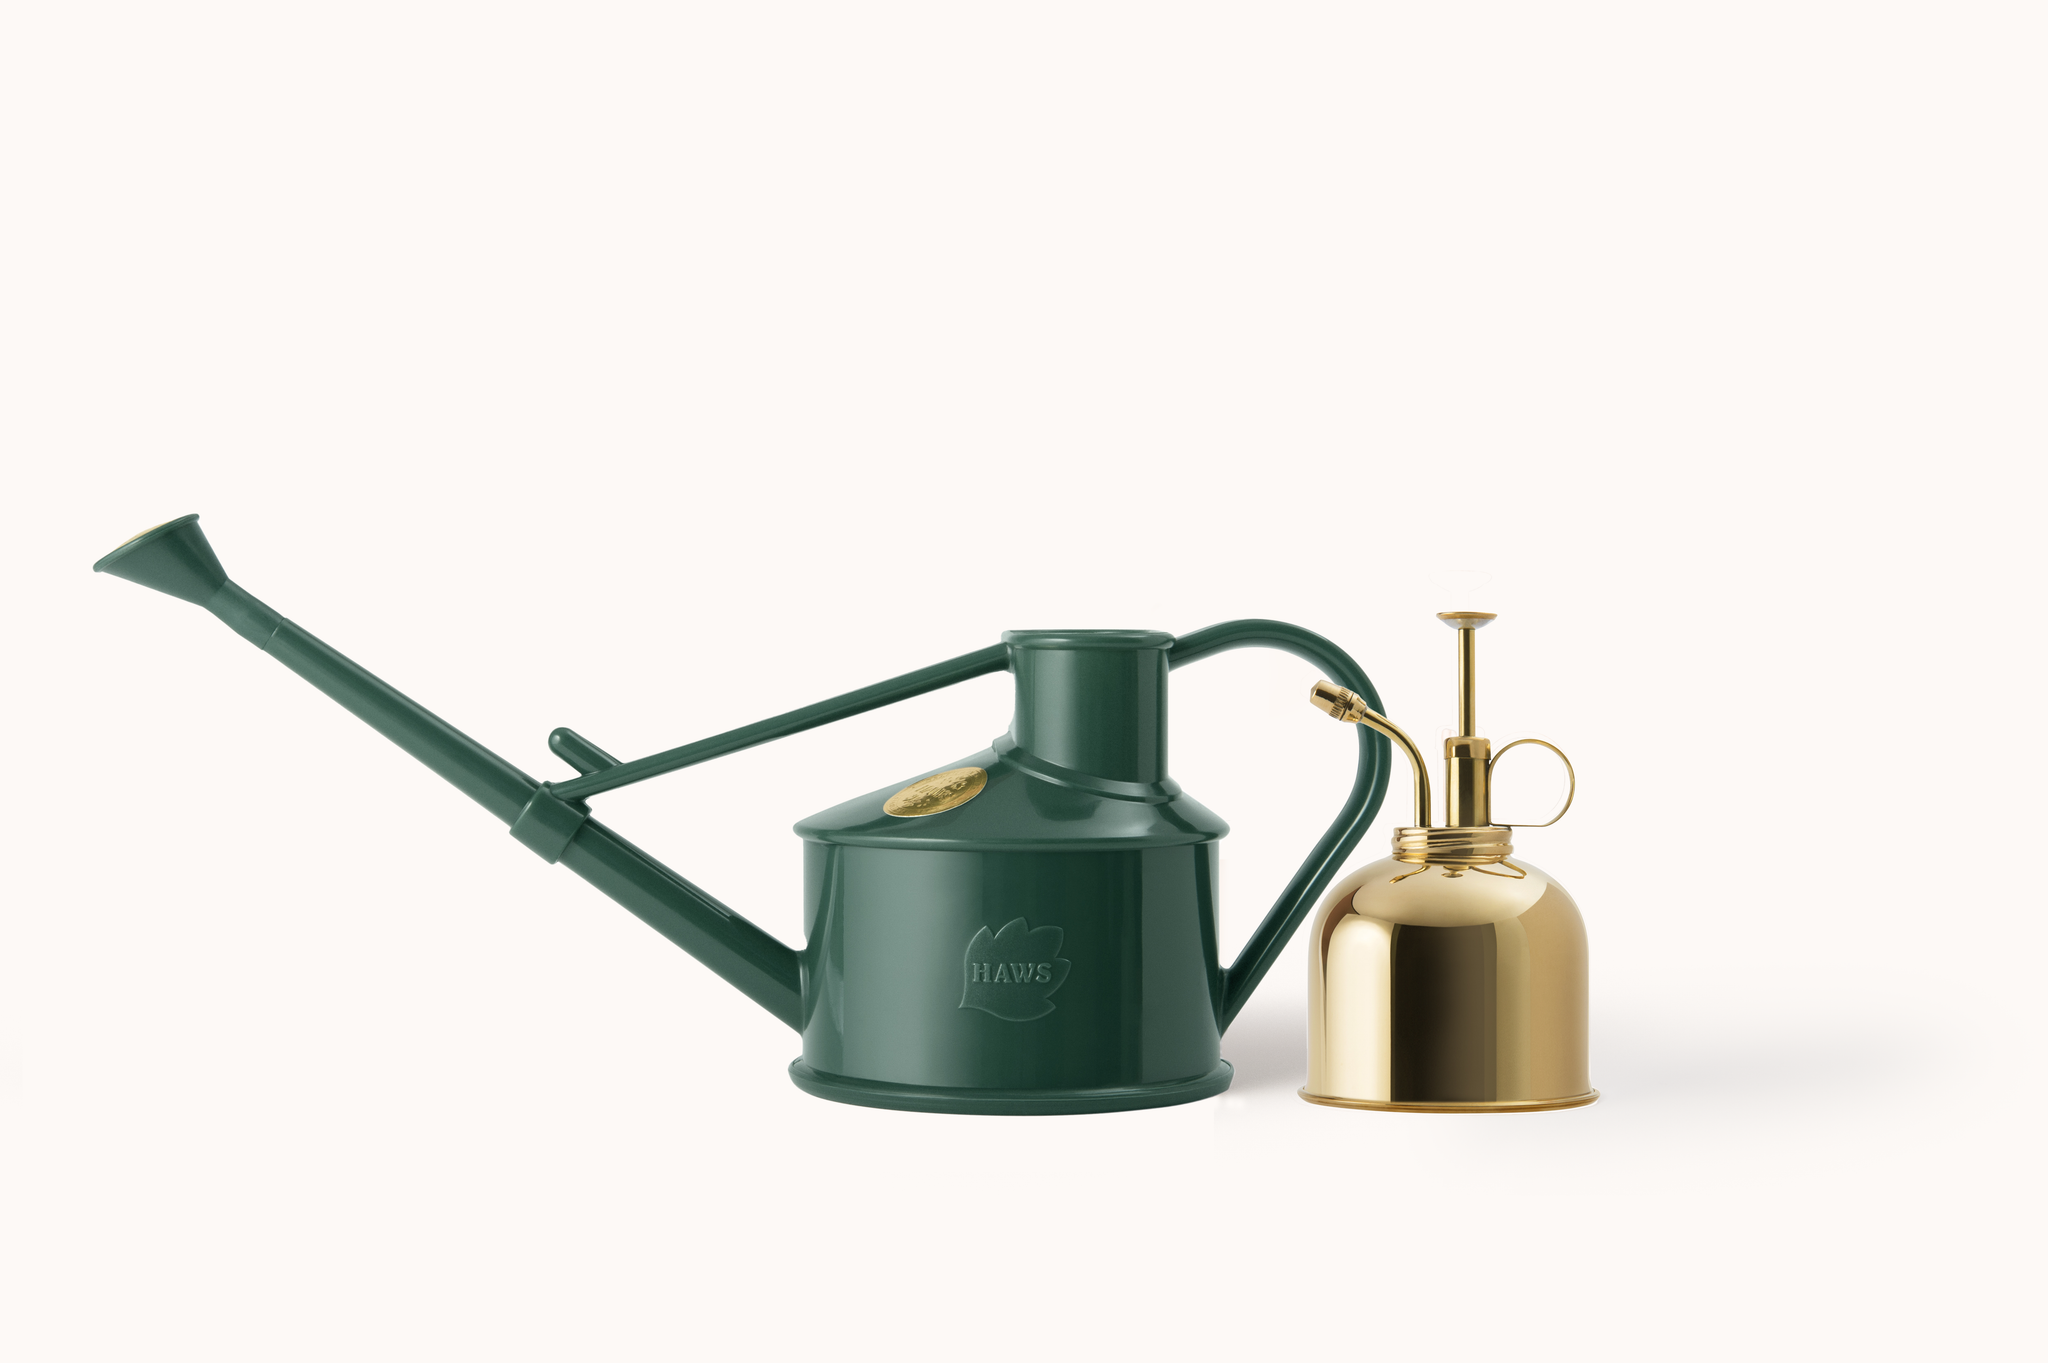 ALLbHAWS English watering cans green